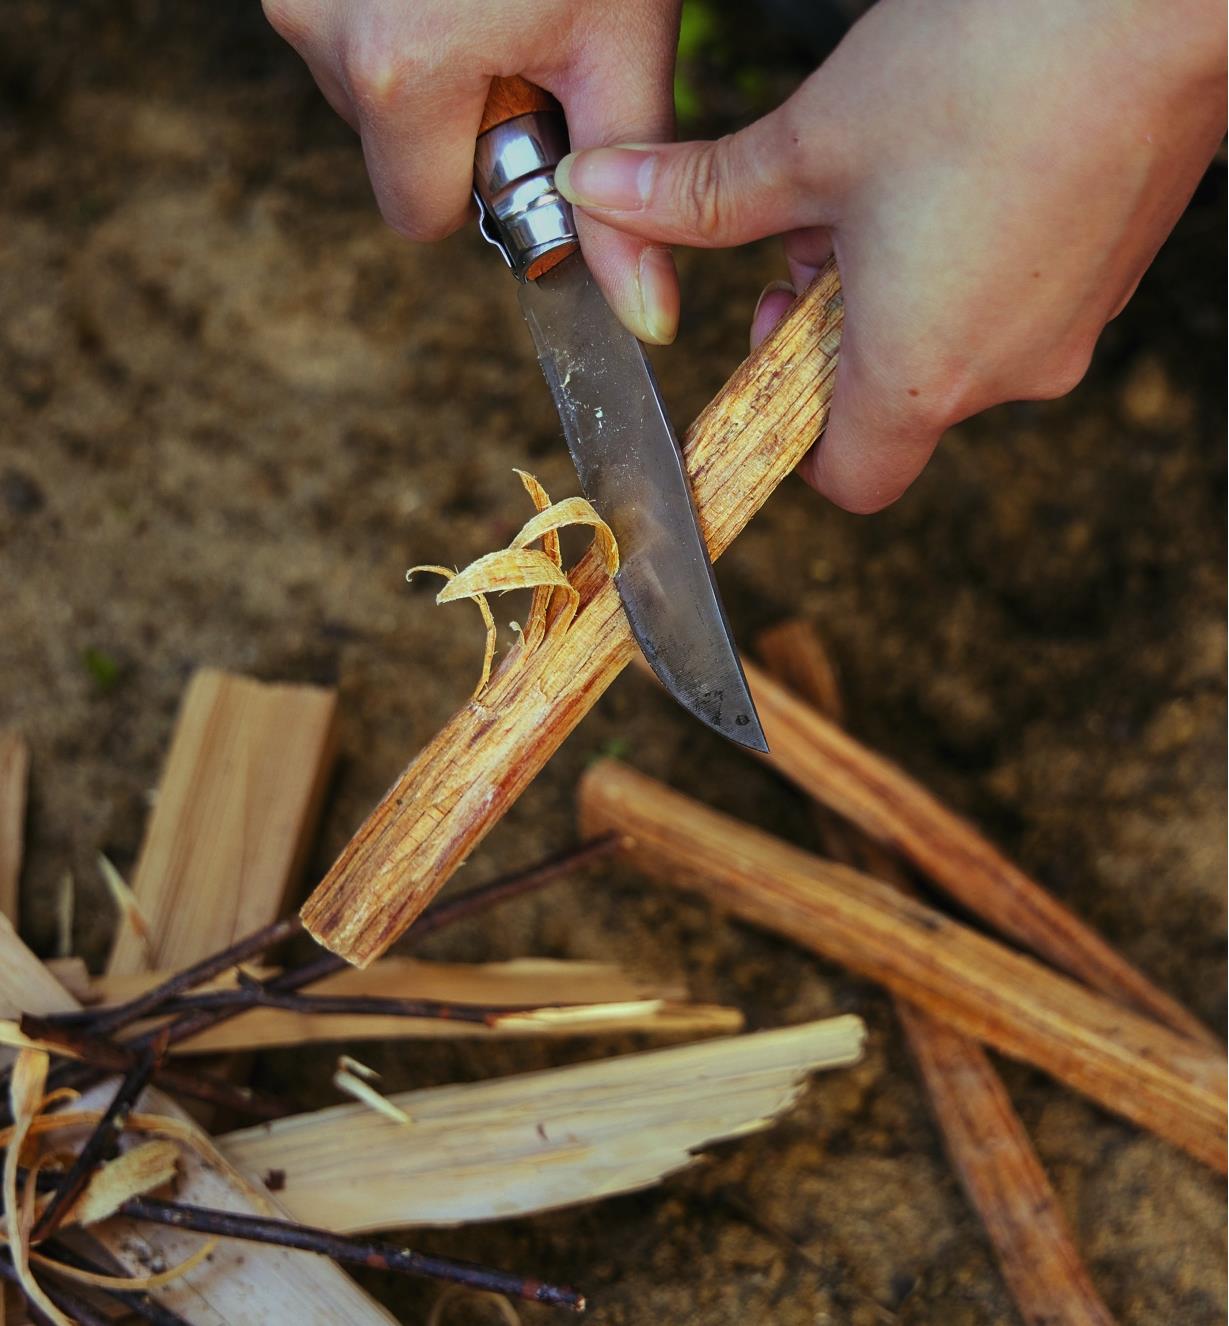 Scraping a Fatwood stick with a knife before lighting a campfire